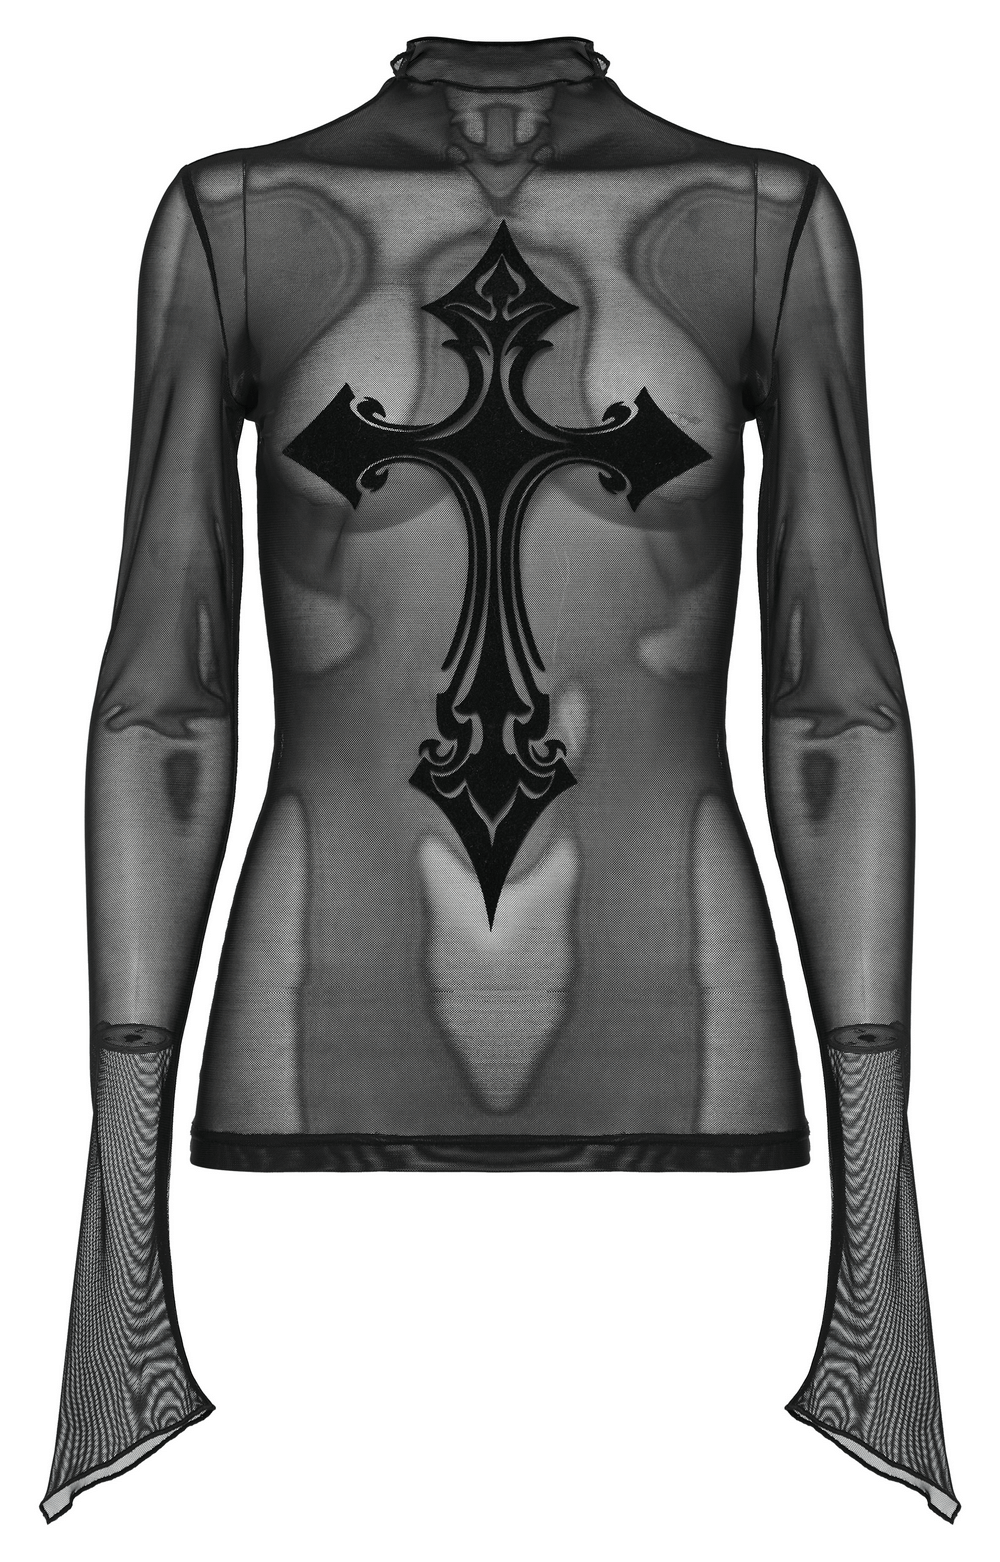 Sultry Flocked Cross Goth Mesh Top for Edgy Appeal - HARD'N'HEAVY